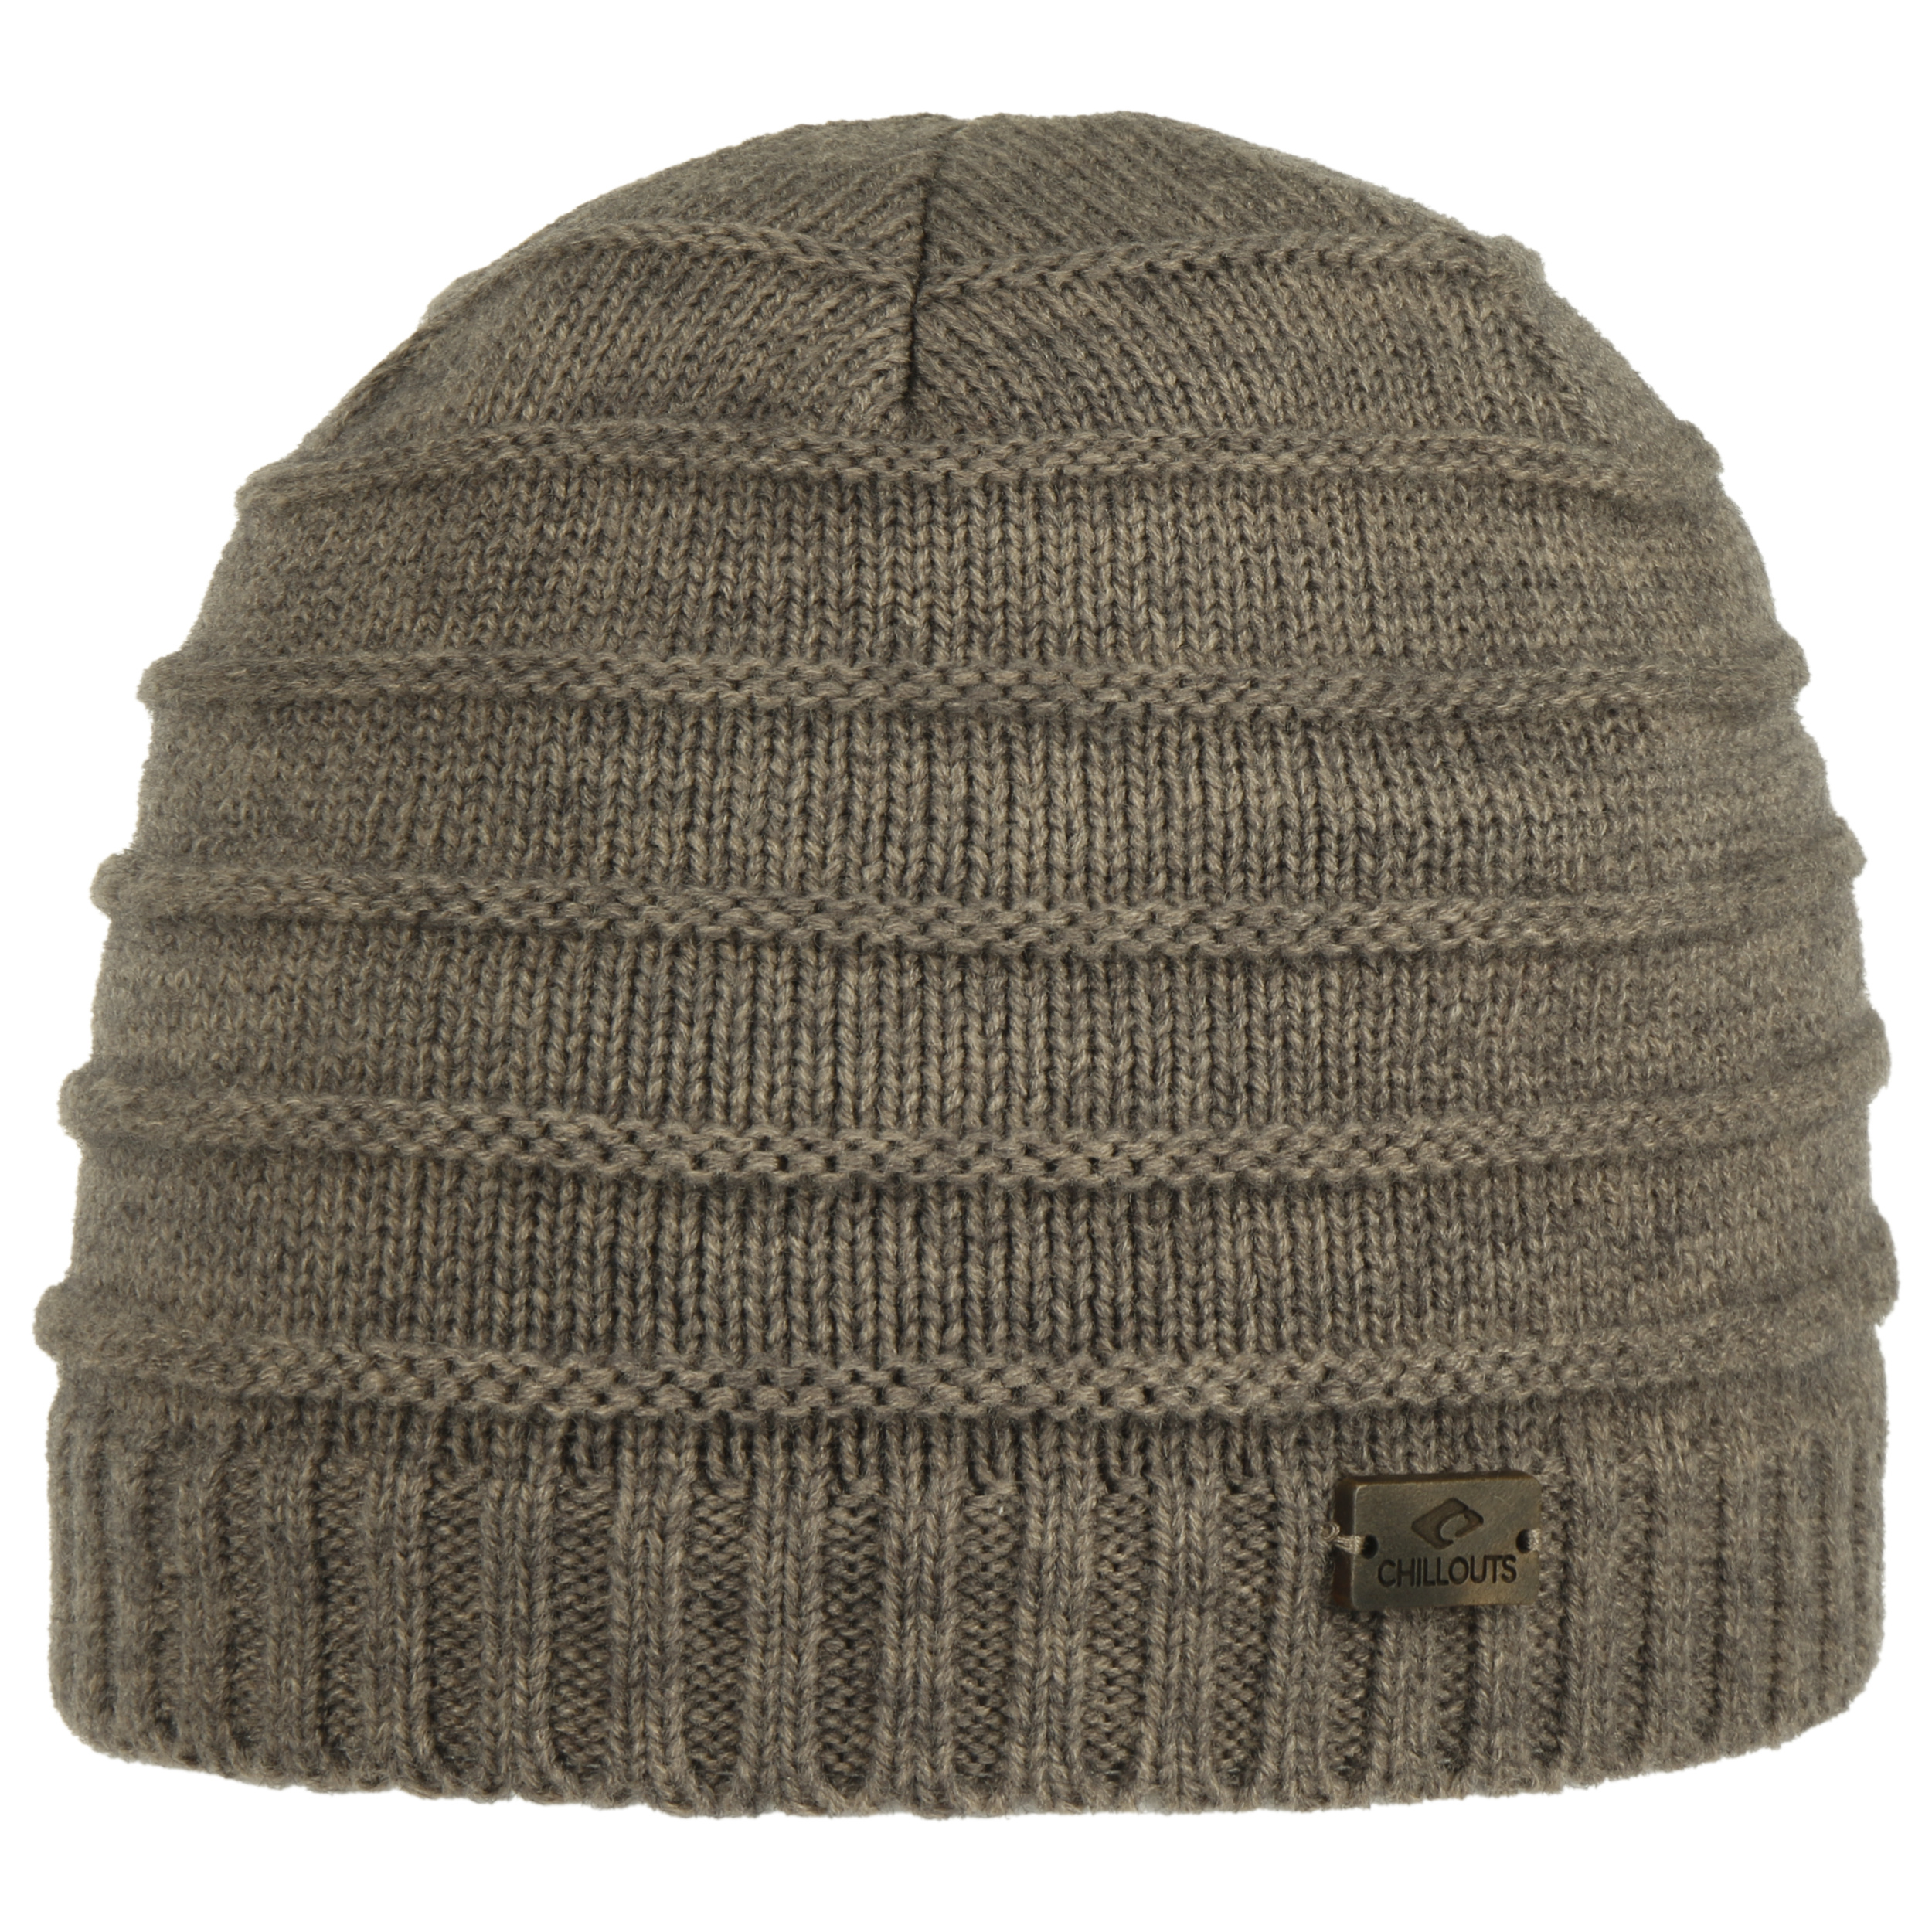 Hat - Chillouts € 26,95 by Arne Beanie